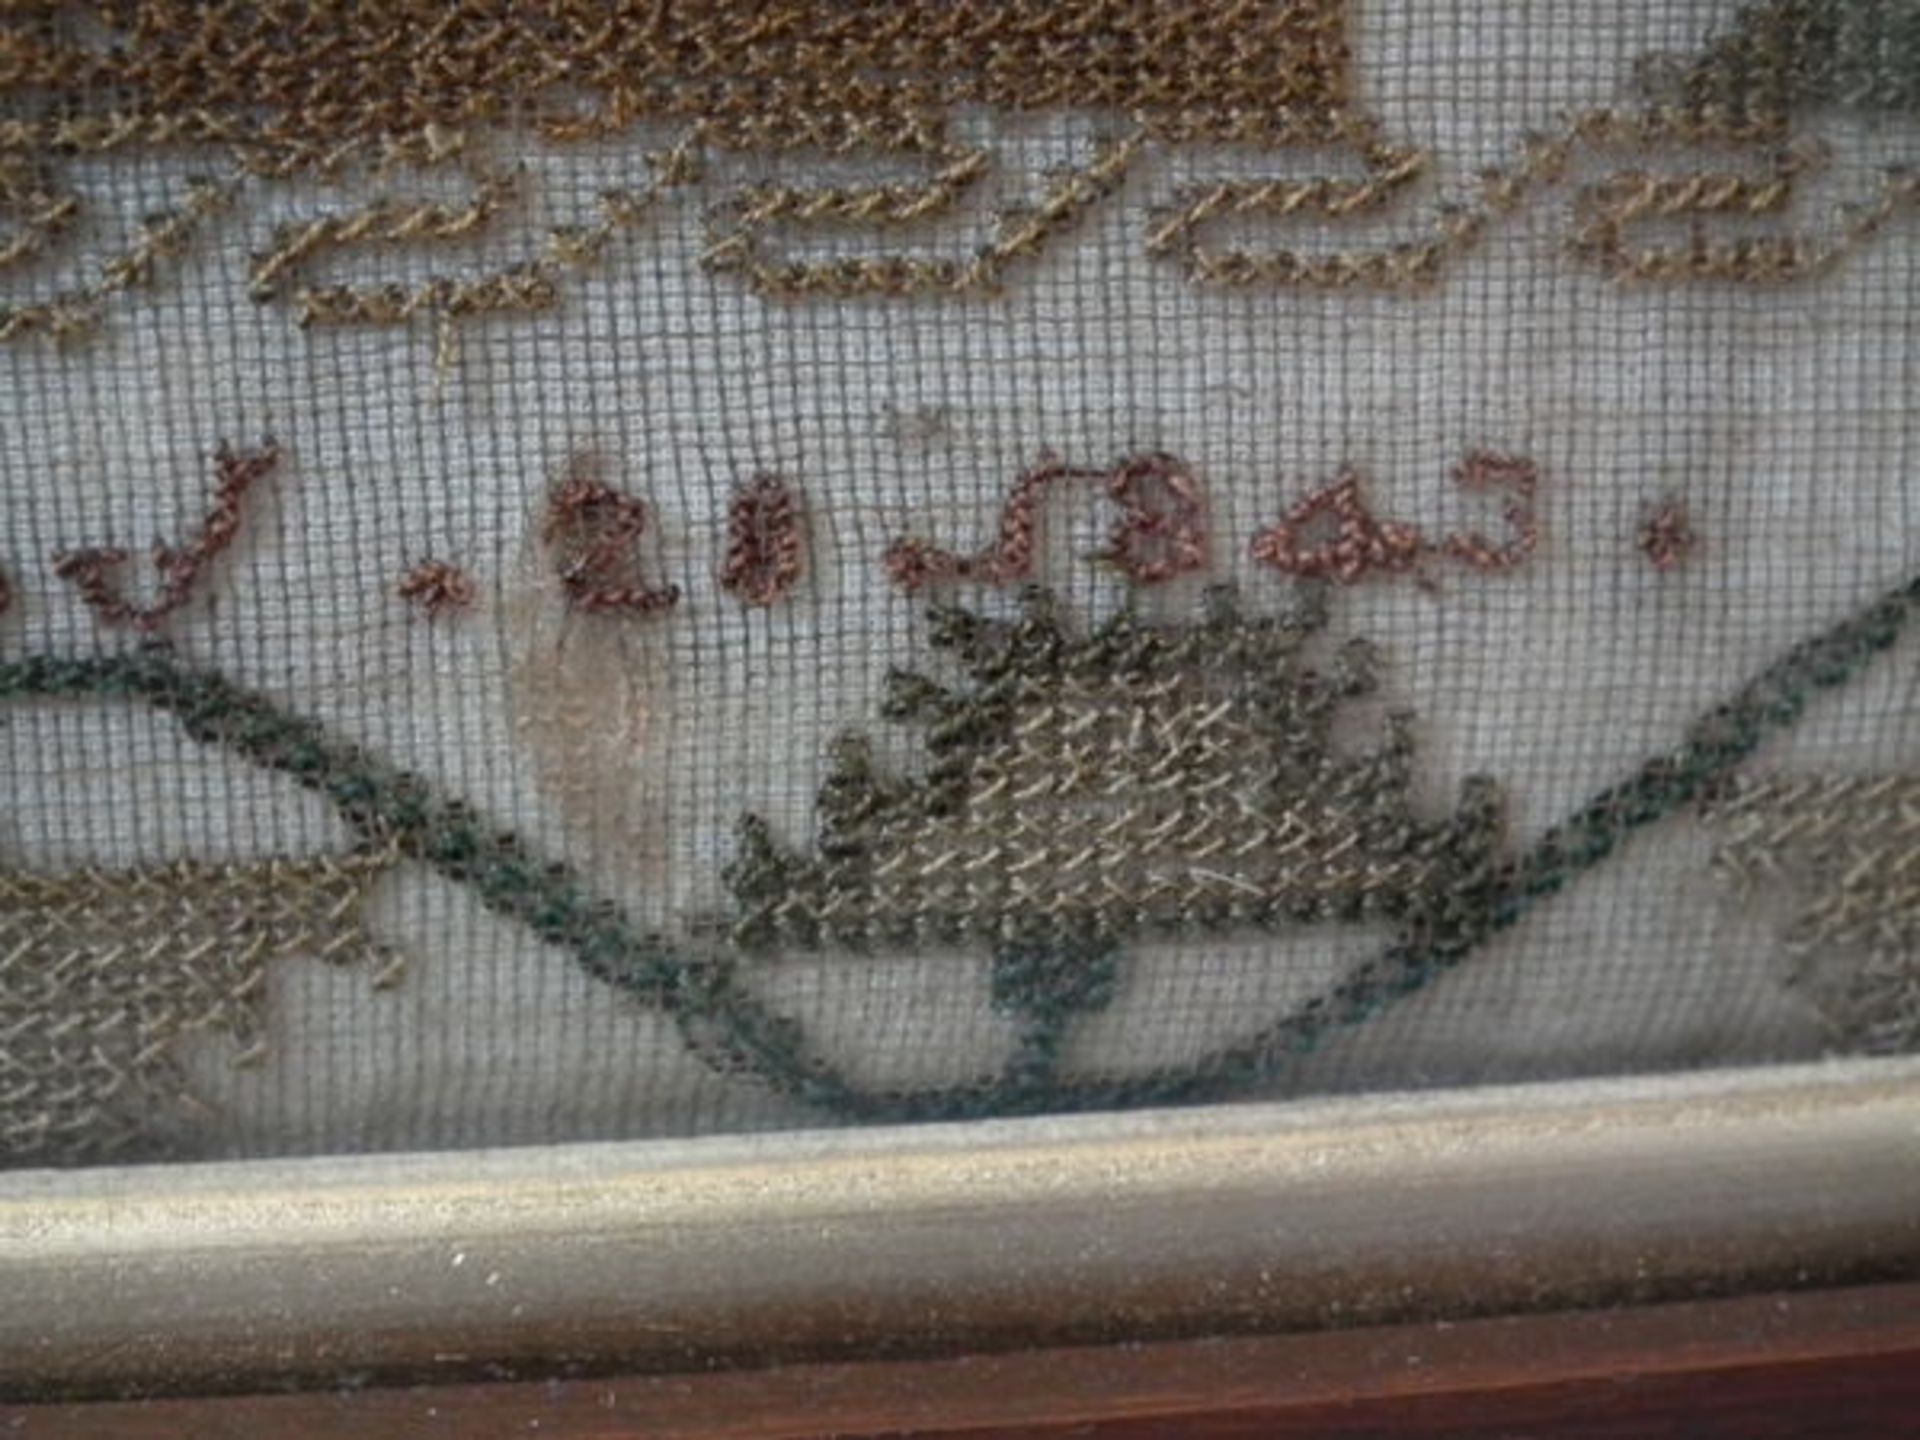 Needlework School Sampler dated 1843 by Sarah Bryan FREE UK DELIVERY - Image 35 of 38